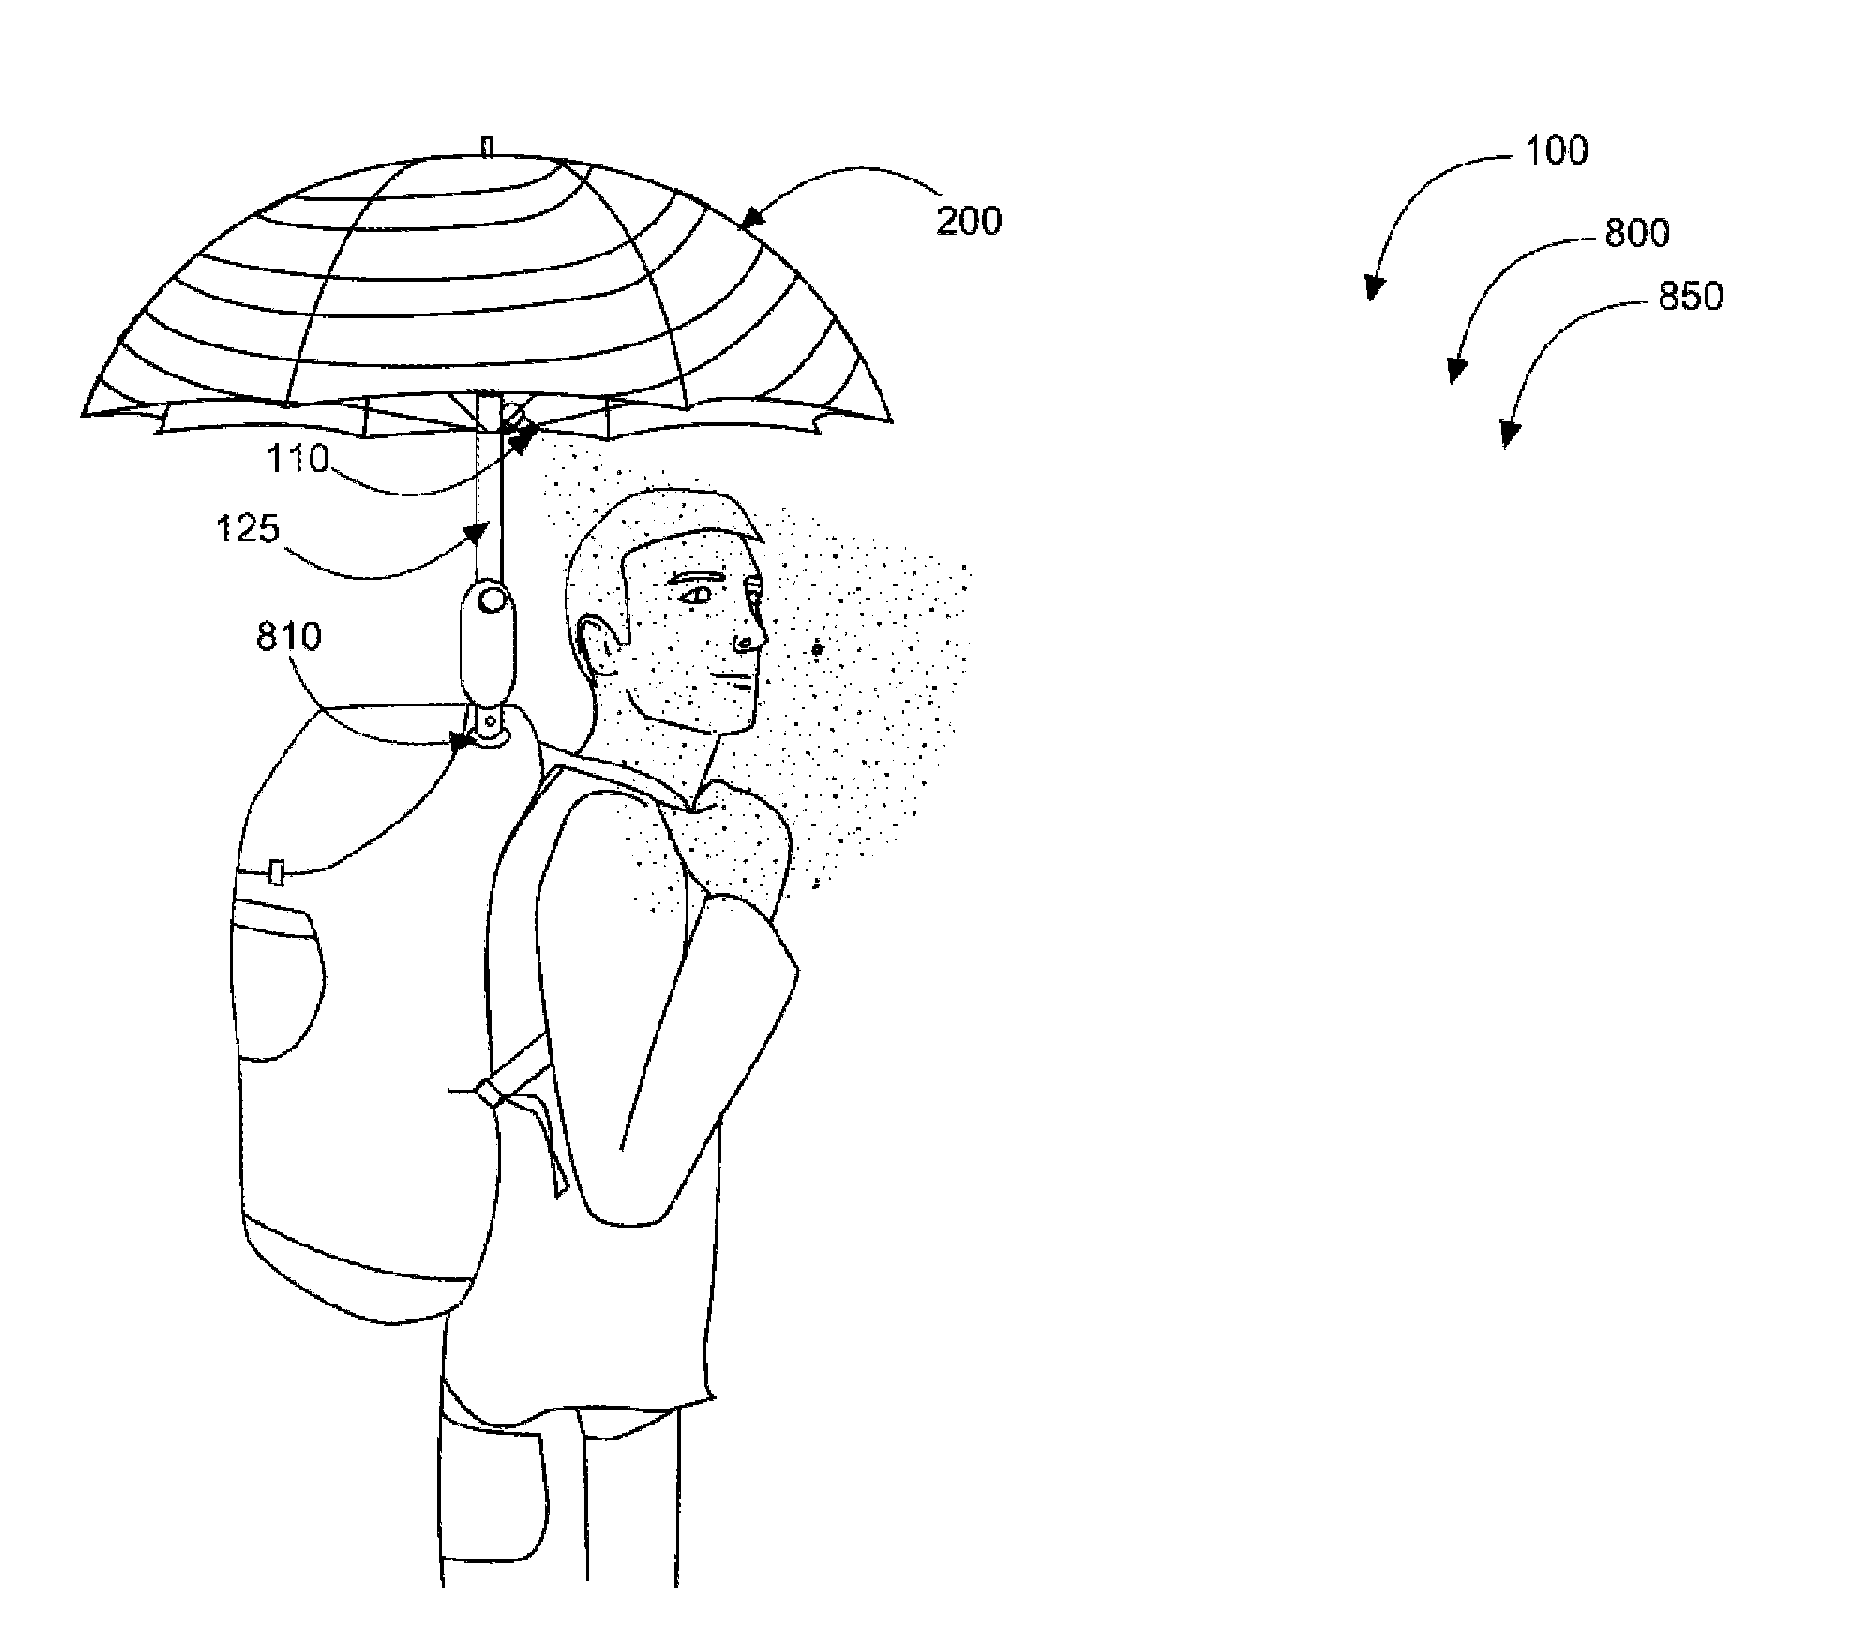 Mister-equipped umbrella system